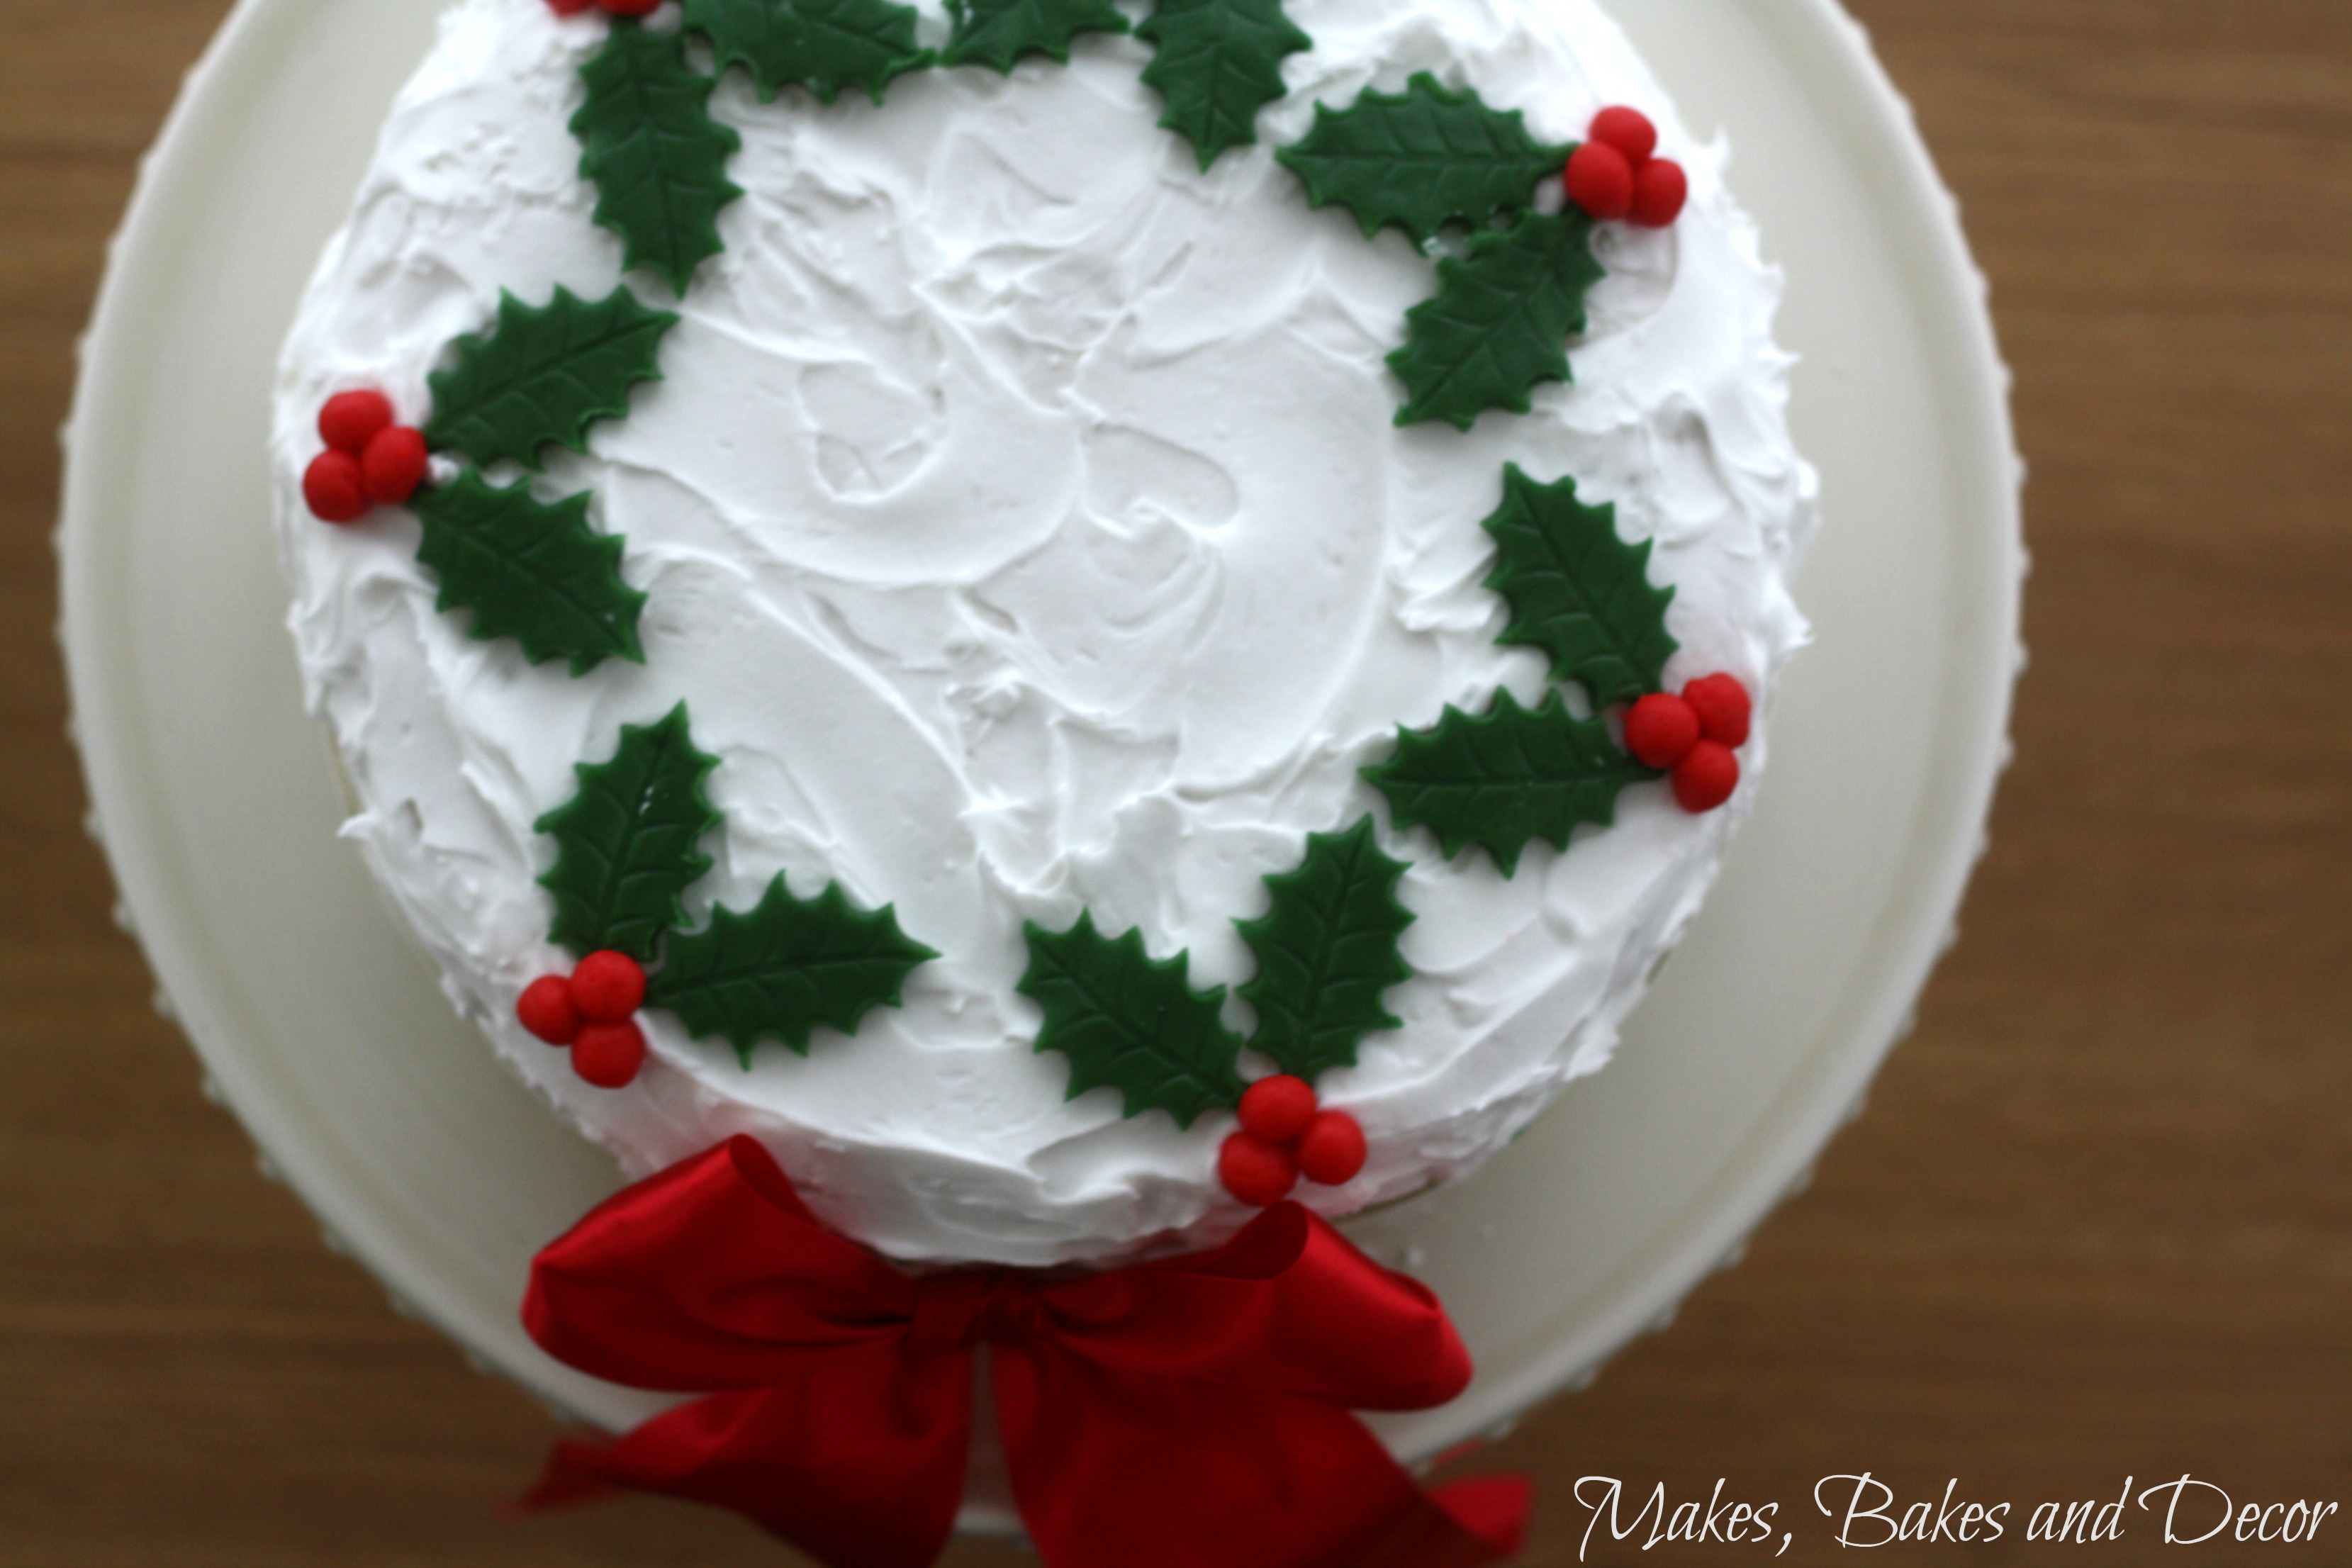 Decorated Christmas Cakes Ideas